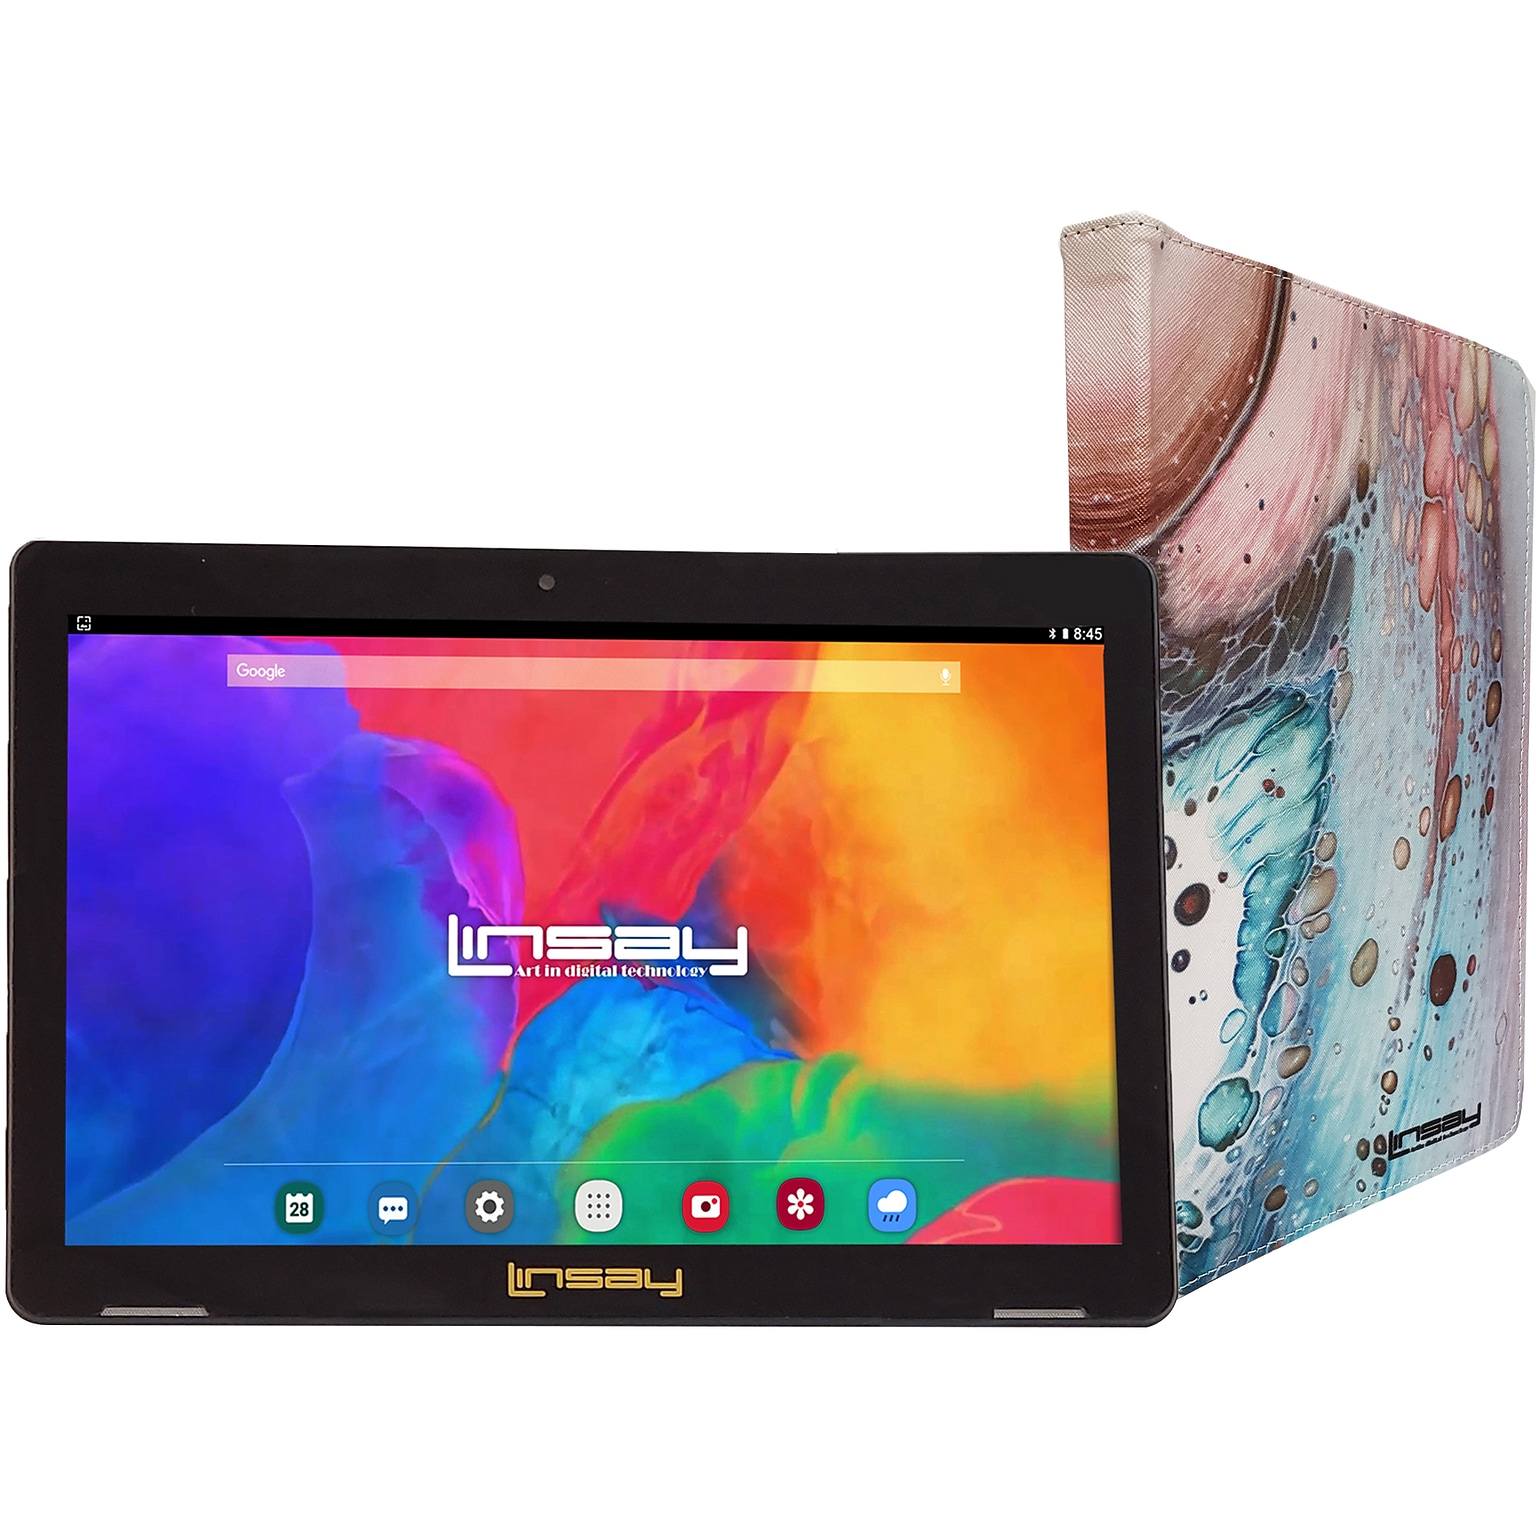 Linsay 10.1 Tablet with Case, WiFi, 2GB RAM, 64GB Storage, Android 13, Black/Space Marble (F10IPSPAC)